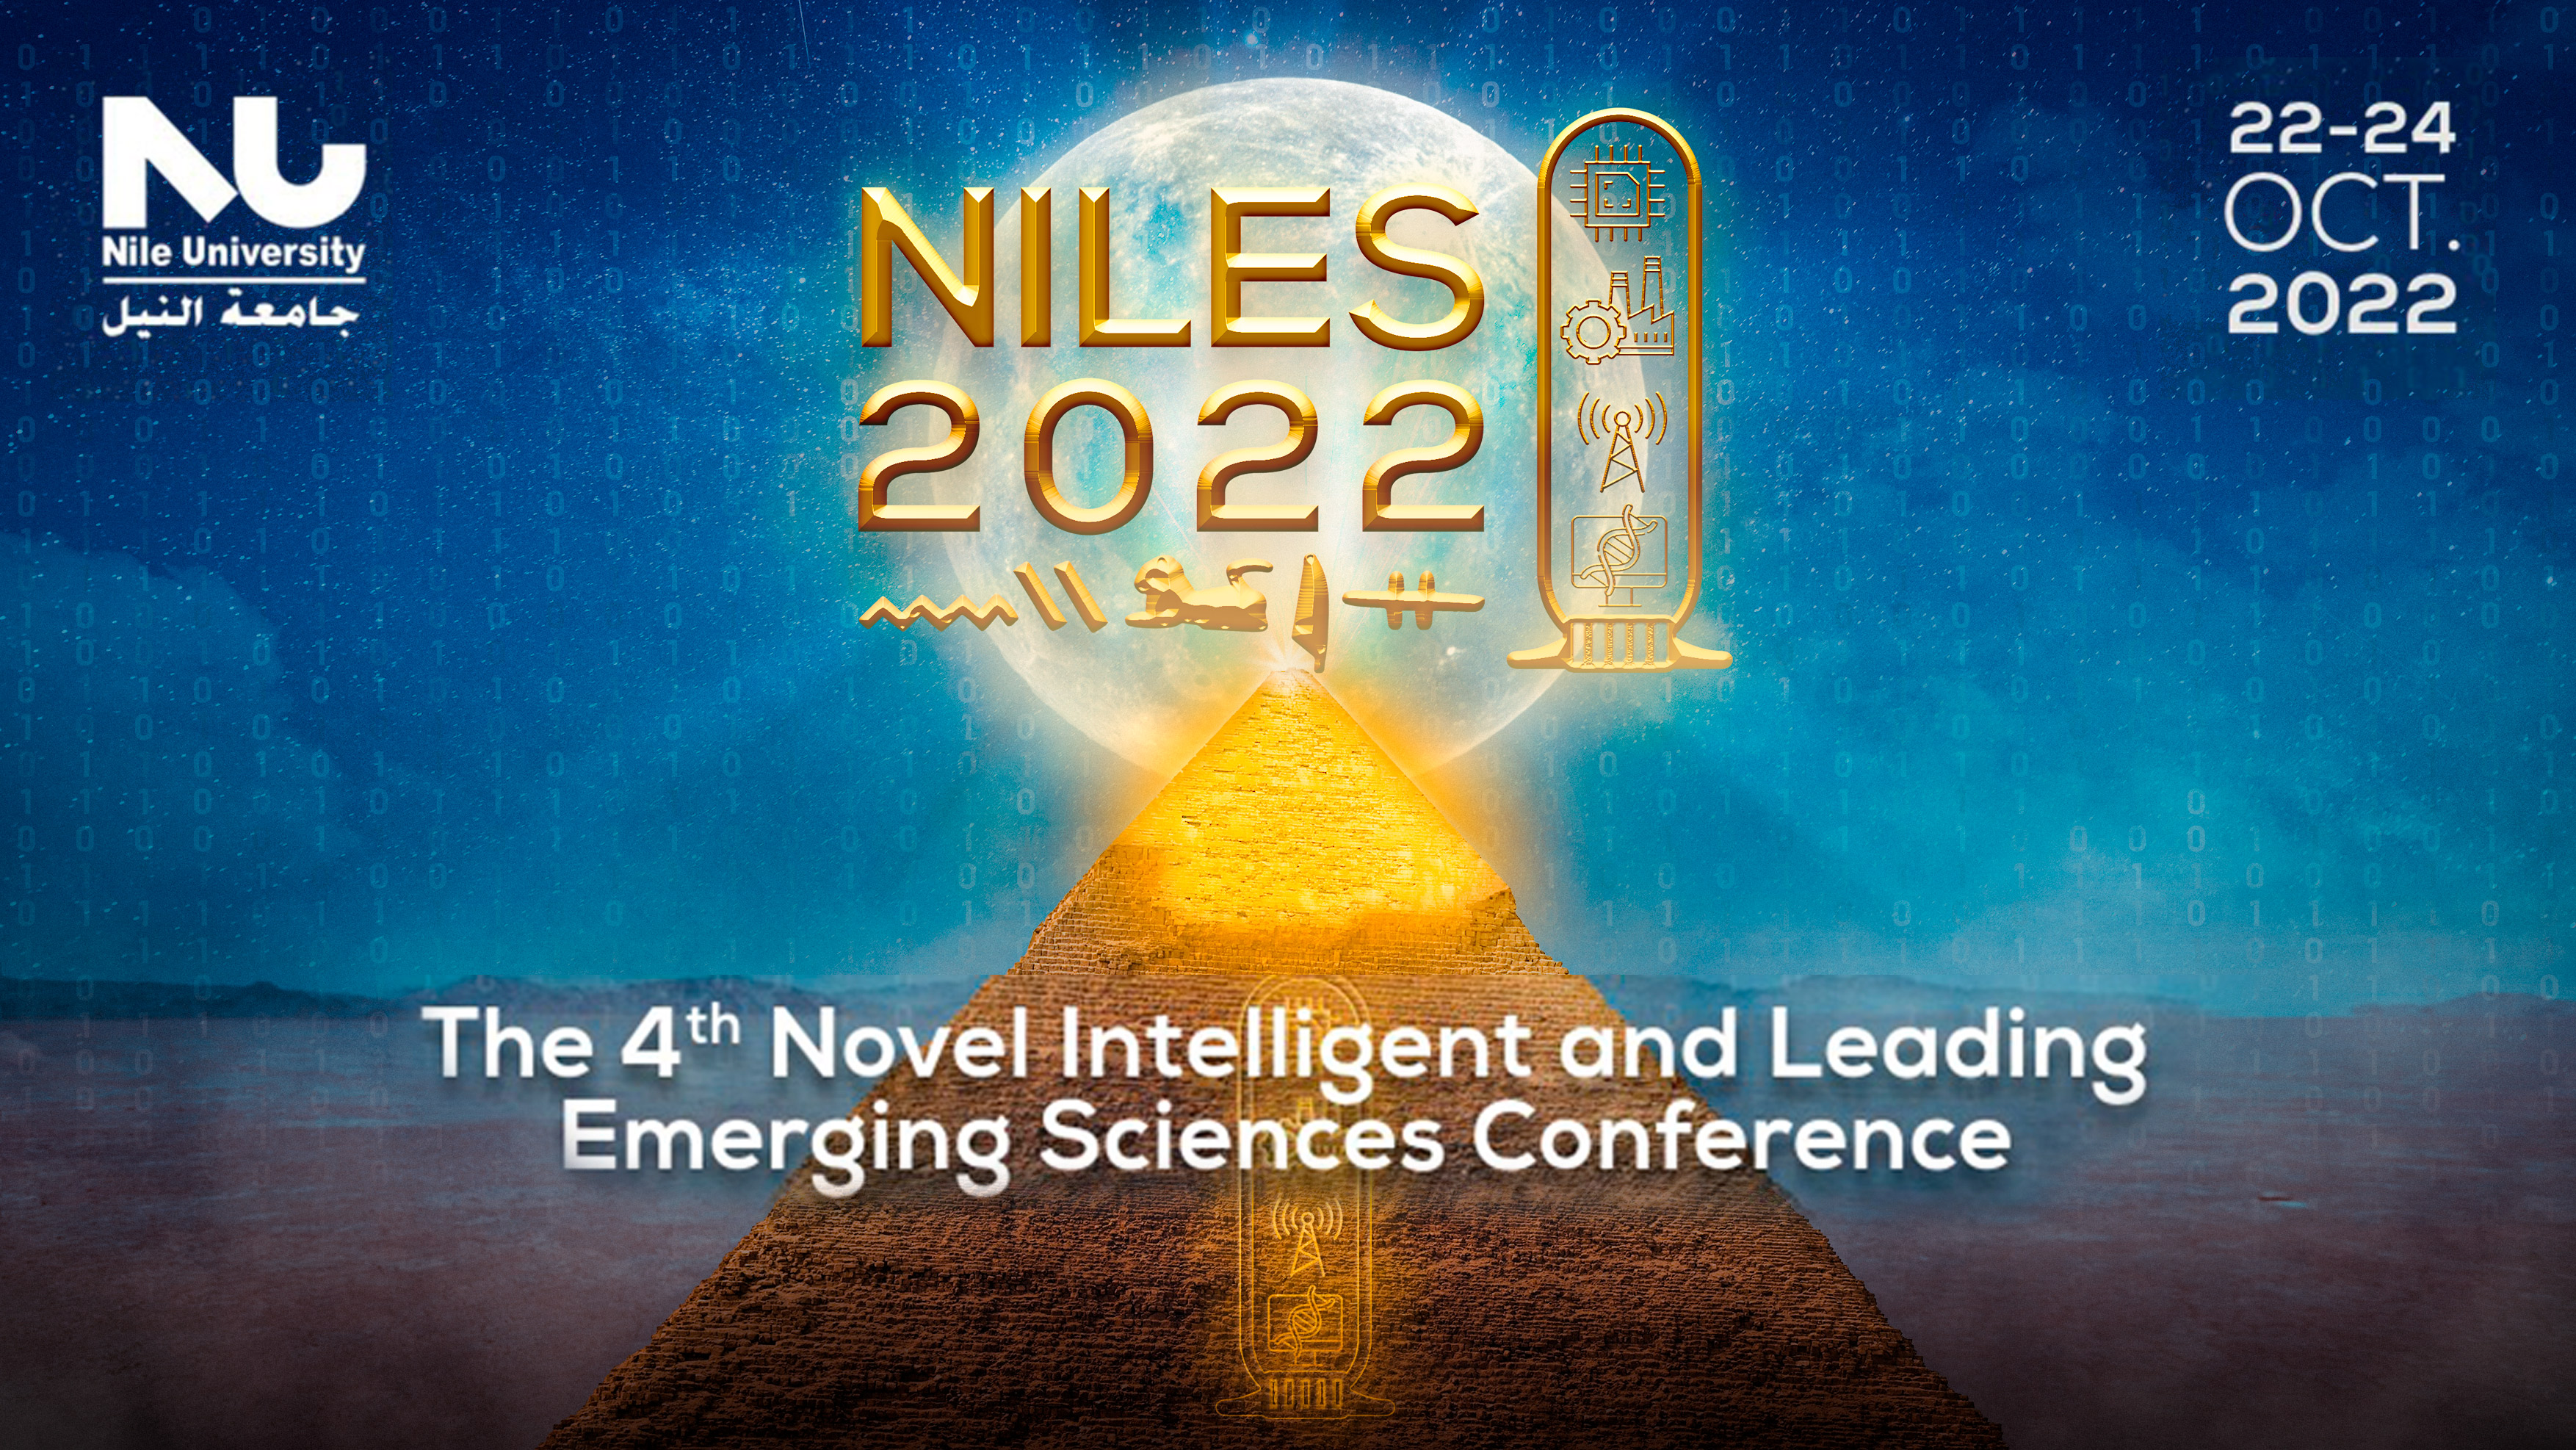 niles2022_conference